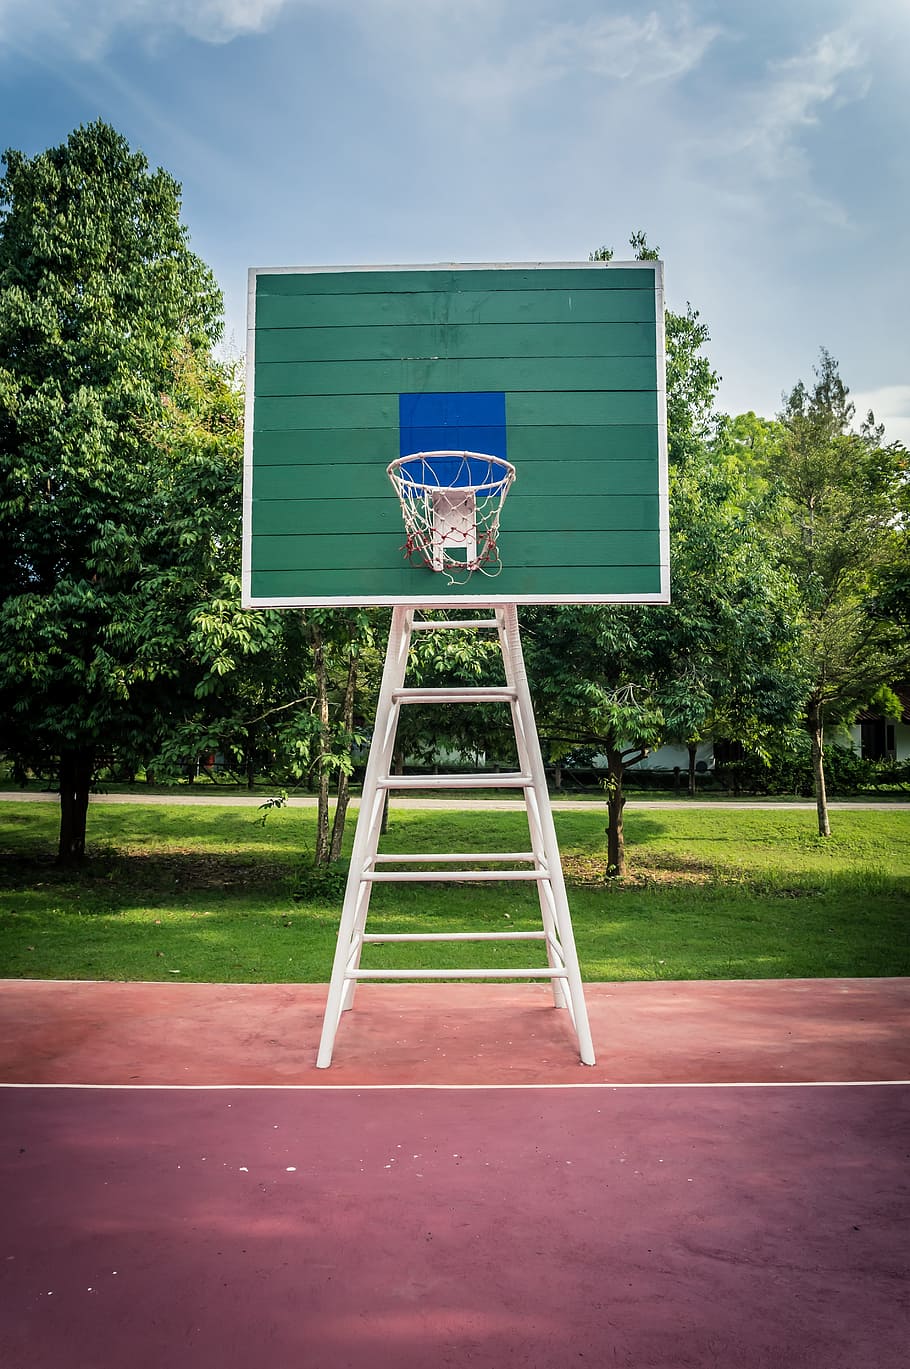 blue, white, basketball hoop, basketball, court, outdoor, playground, park, public, game